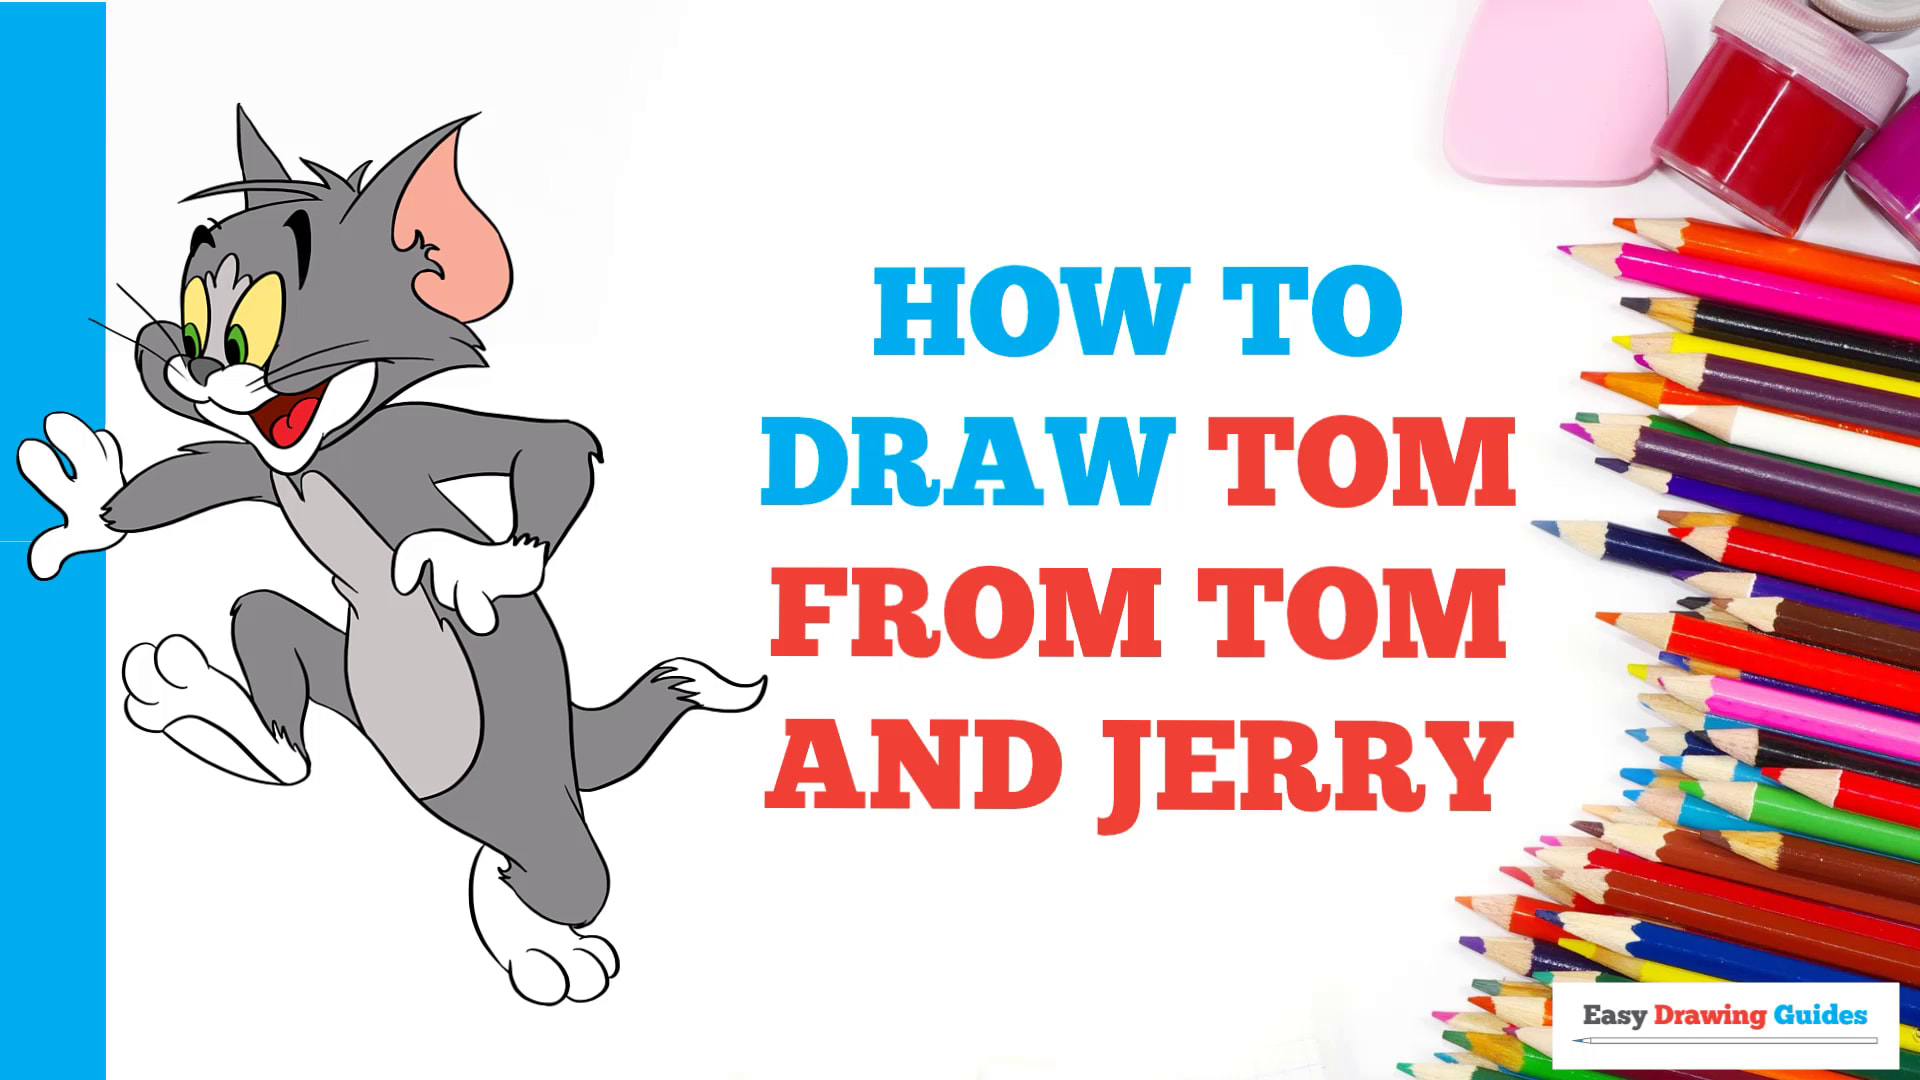 How to Draw Tom from Tom and Jerry - Really Easy Drawing Tutorial